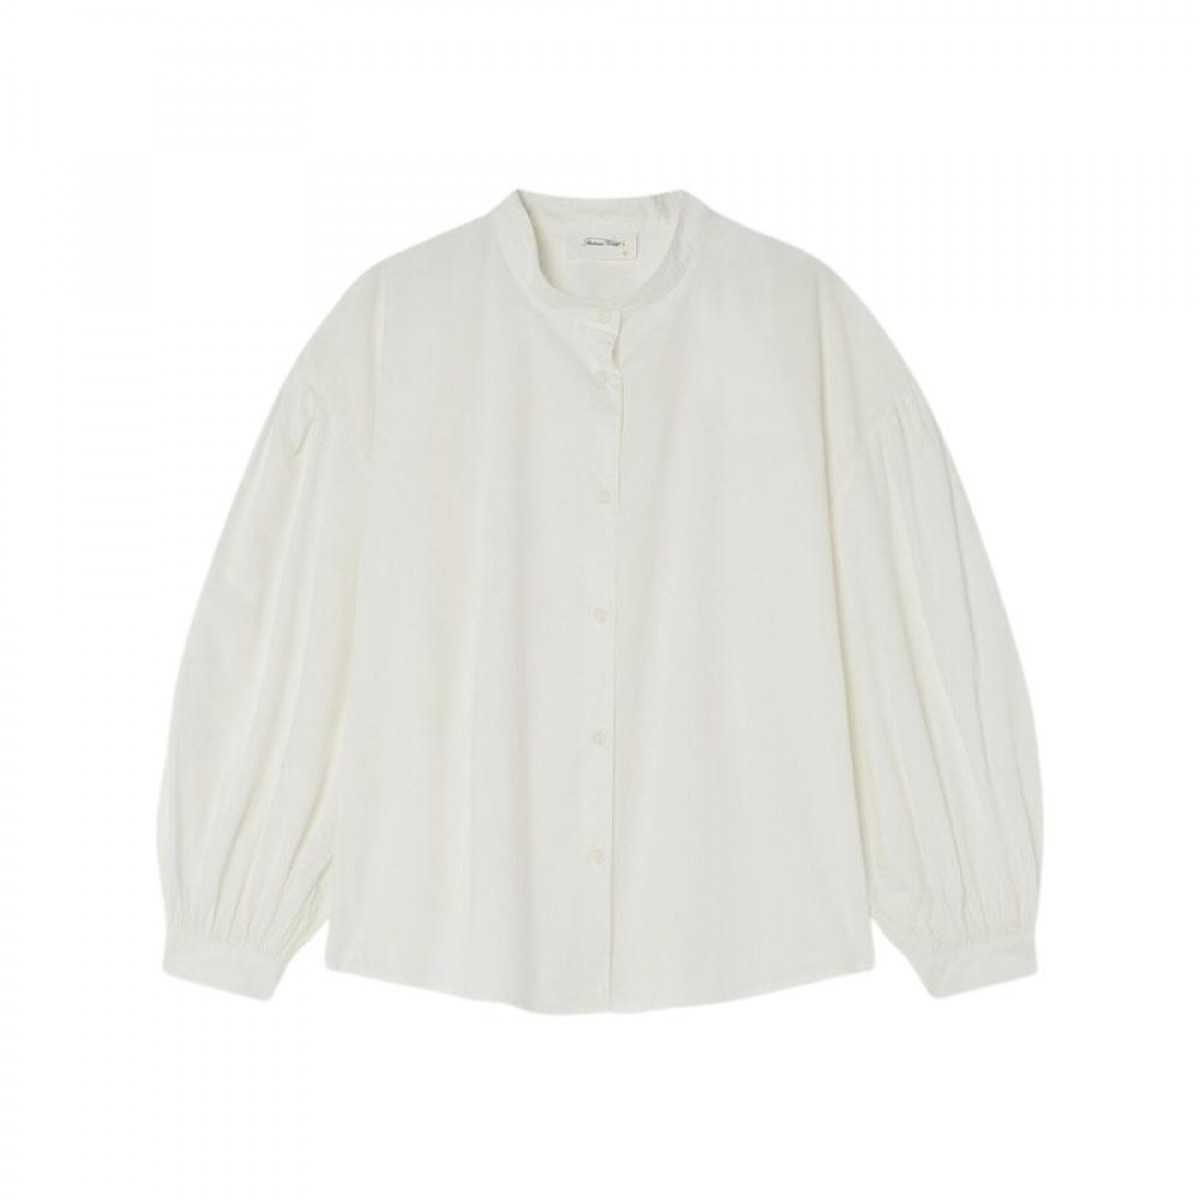 hydway shirt - white - front